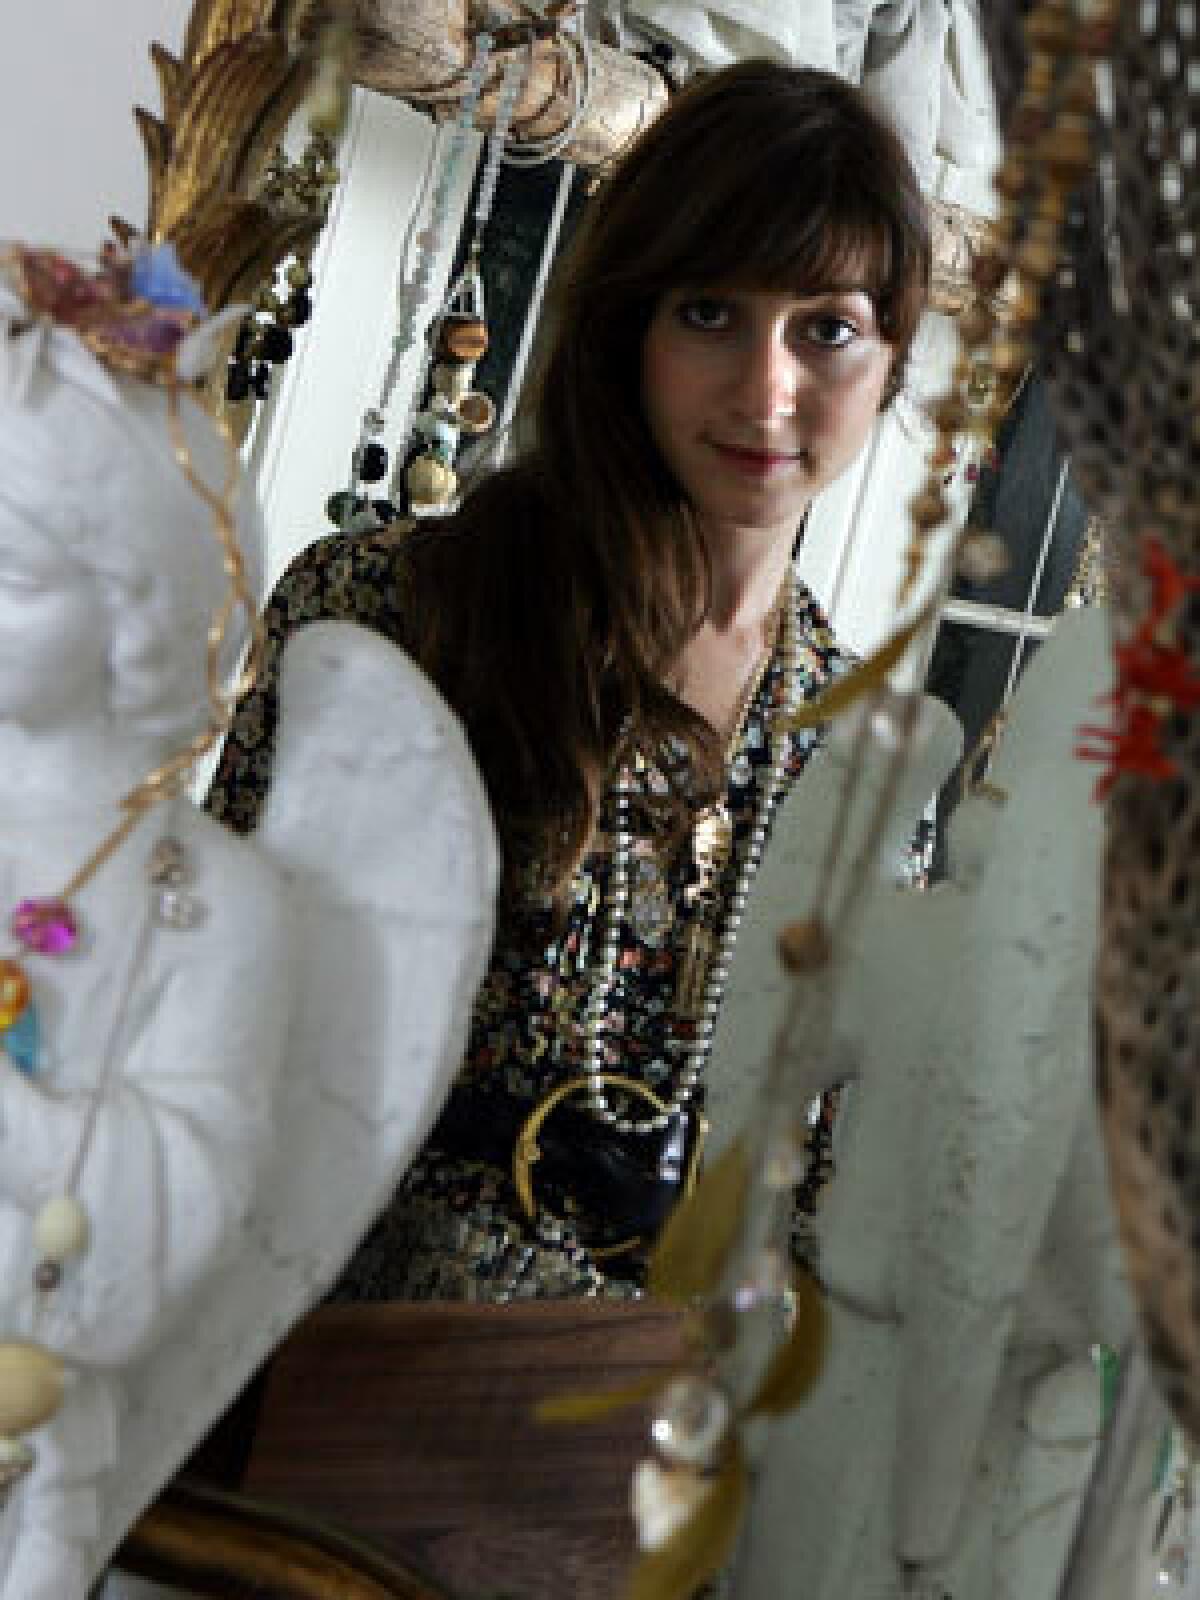 CRYSTAL PALACE: In her Los Feliz home, Sonia Boyajian, above, fashions jewelry that is both delicate and sculptural.